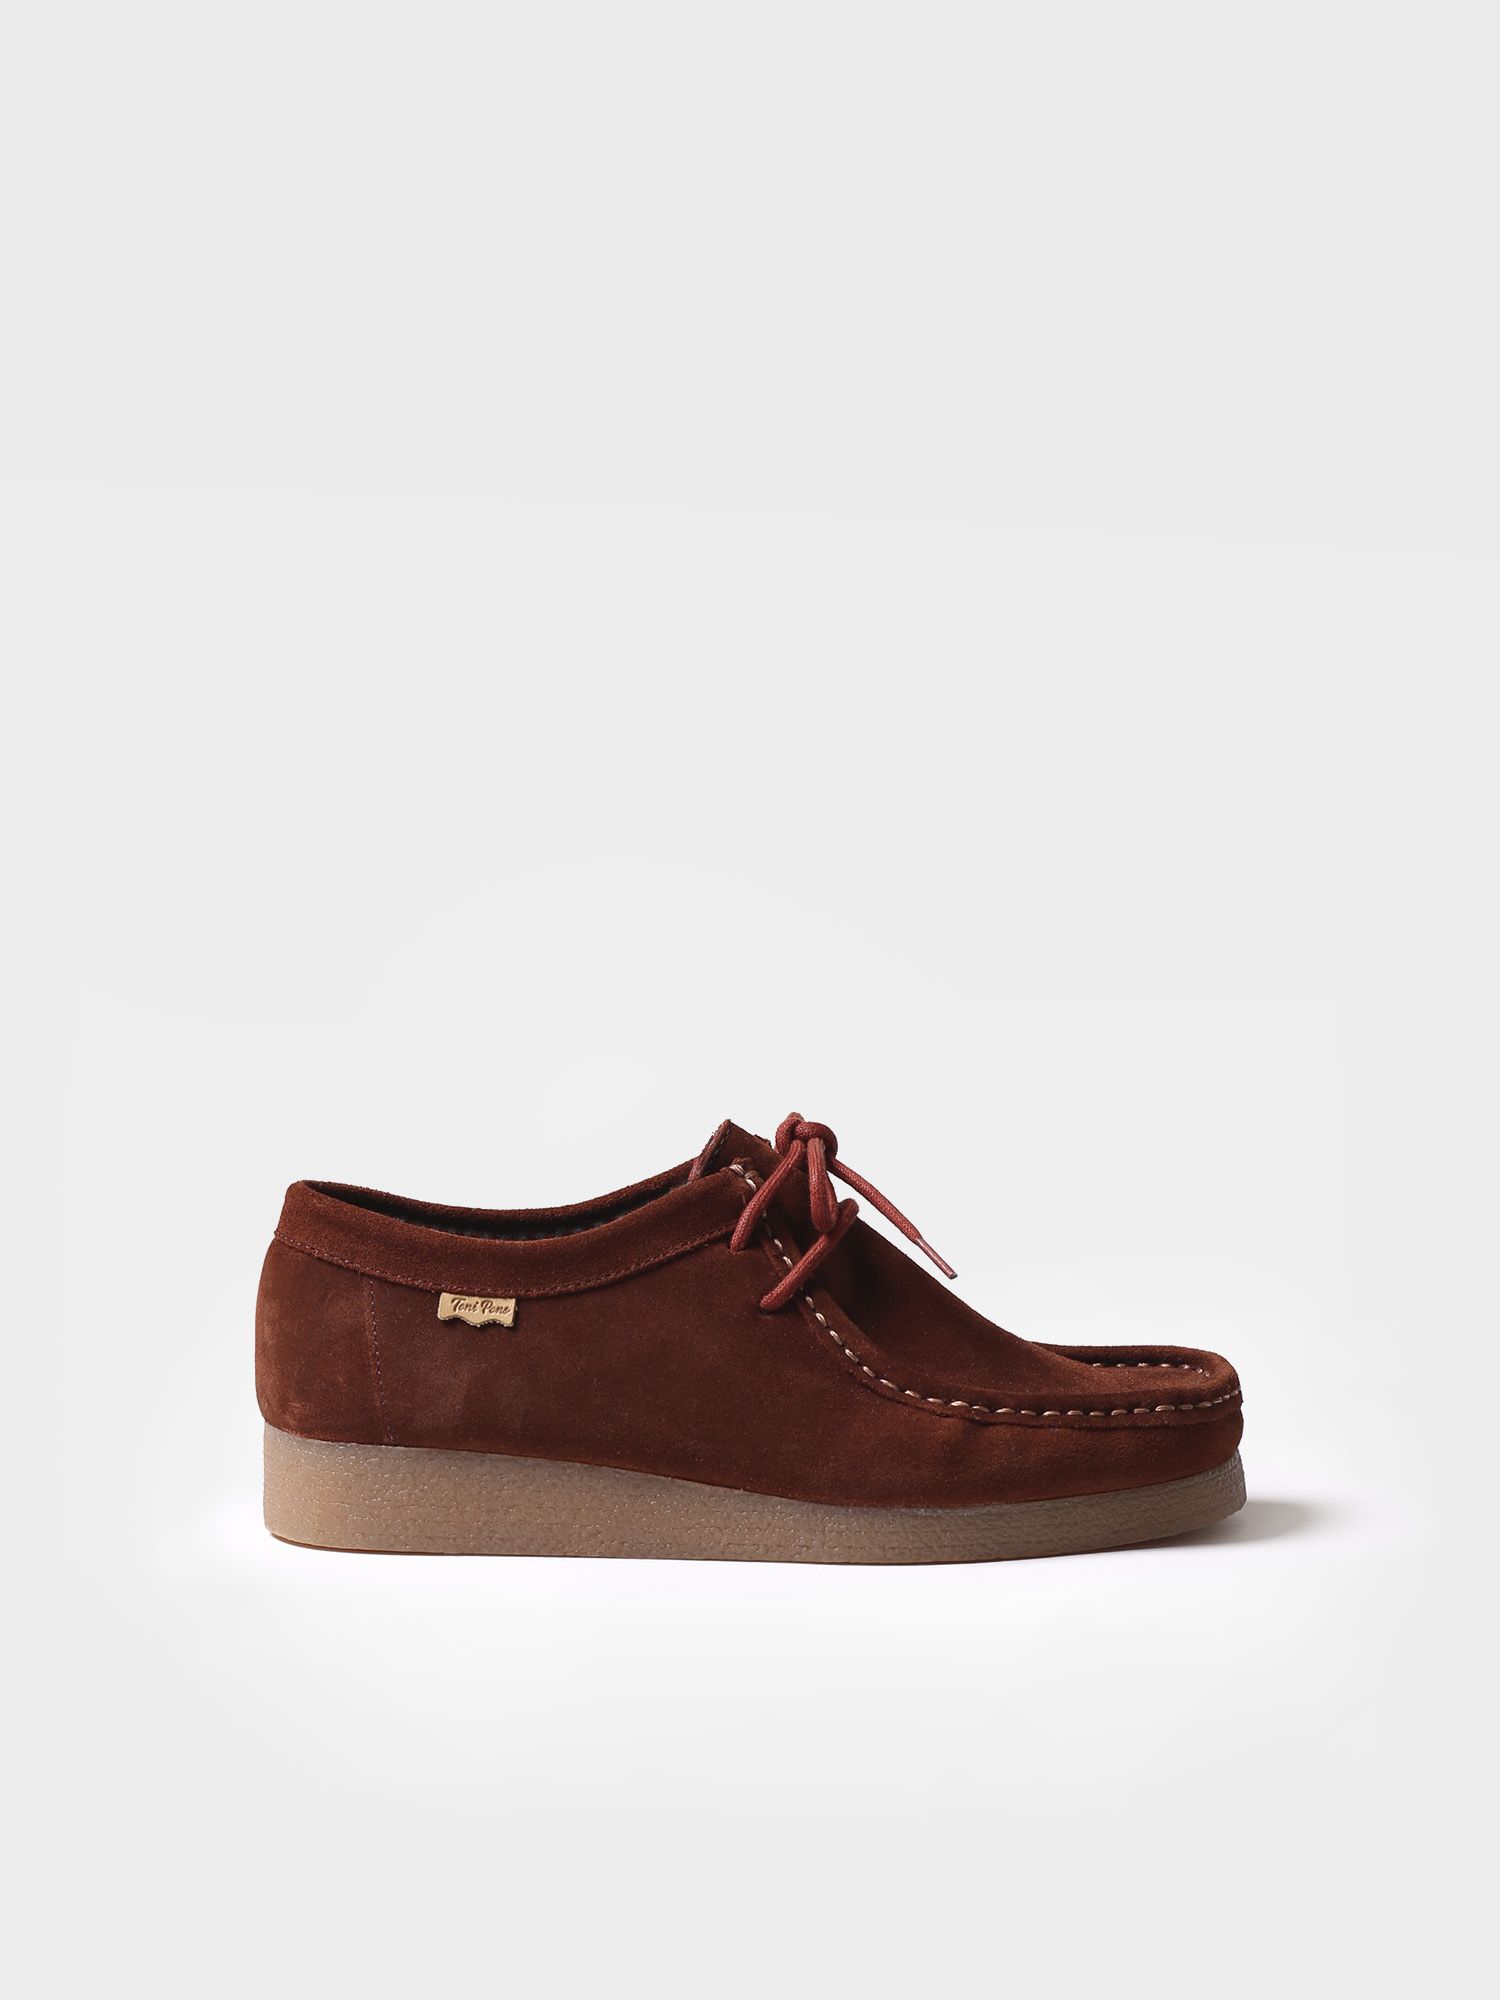 Shoe for men made of suede - KENT-SY